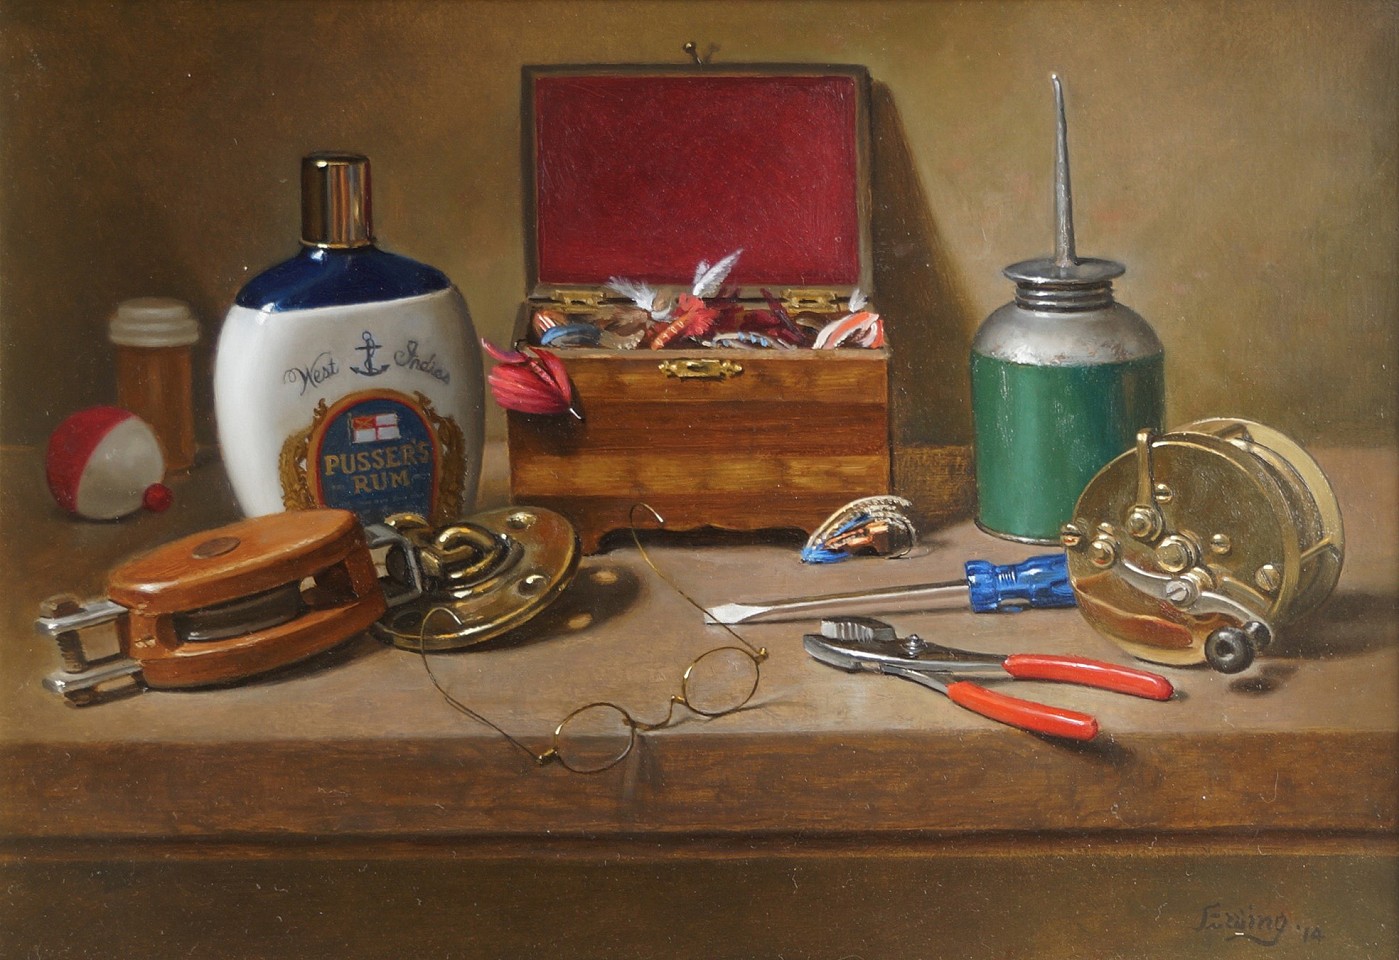 William O. Ewing, Gone Fishing, 2014
oil on wood, 16 x 22 1/2 in. (40.6 x 57.1 cm)
WE180401